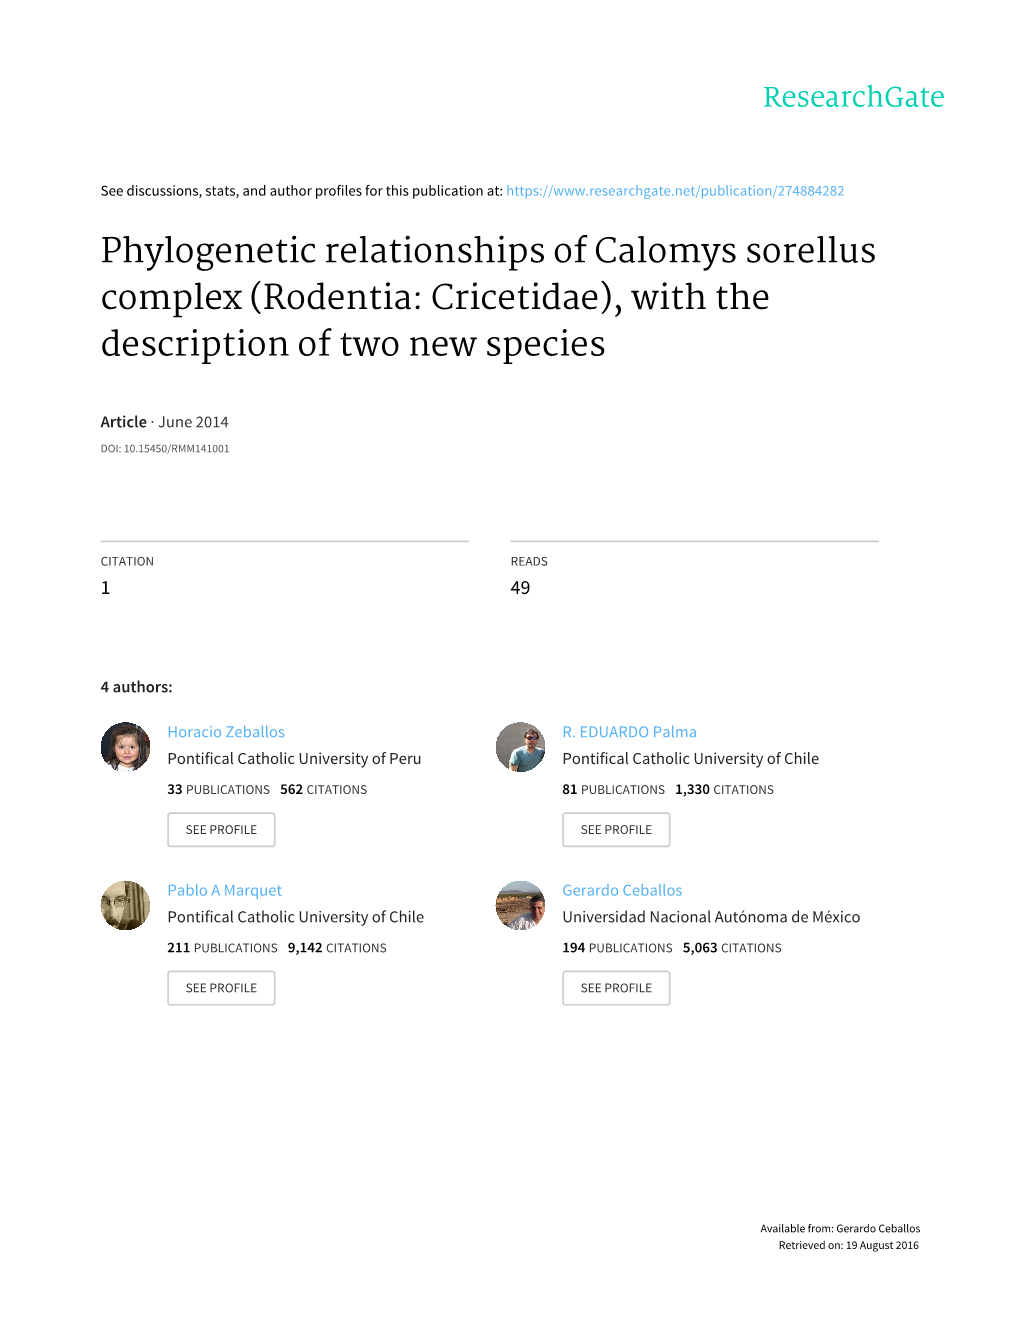 Phylogenetic Relationships of Calomys Sorellus Complex (Rodentia: Cricetidae), with the Description of Two New Species